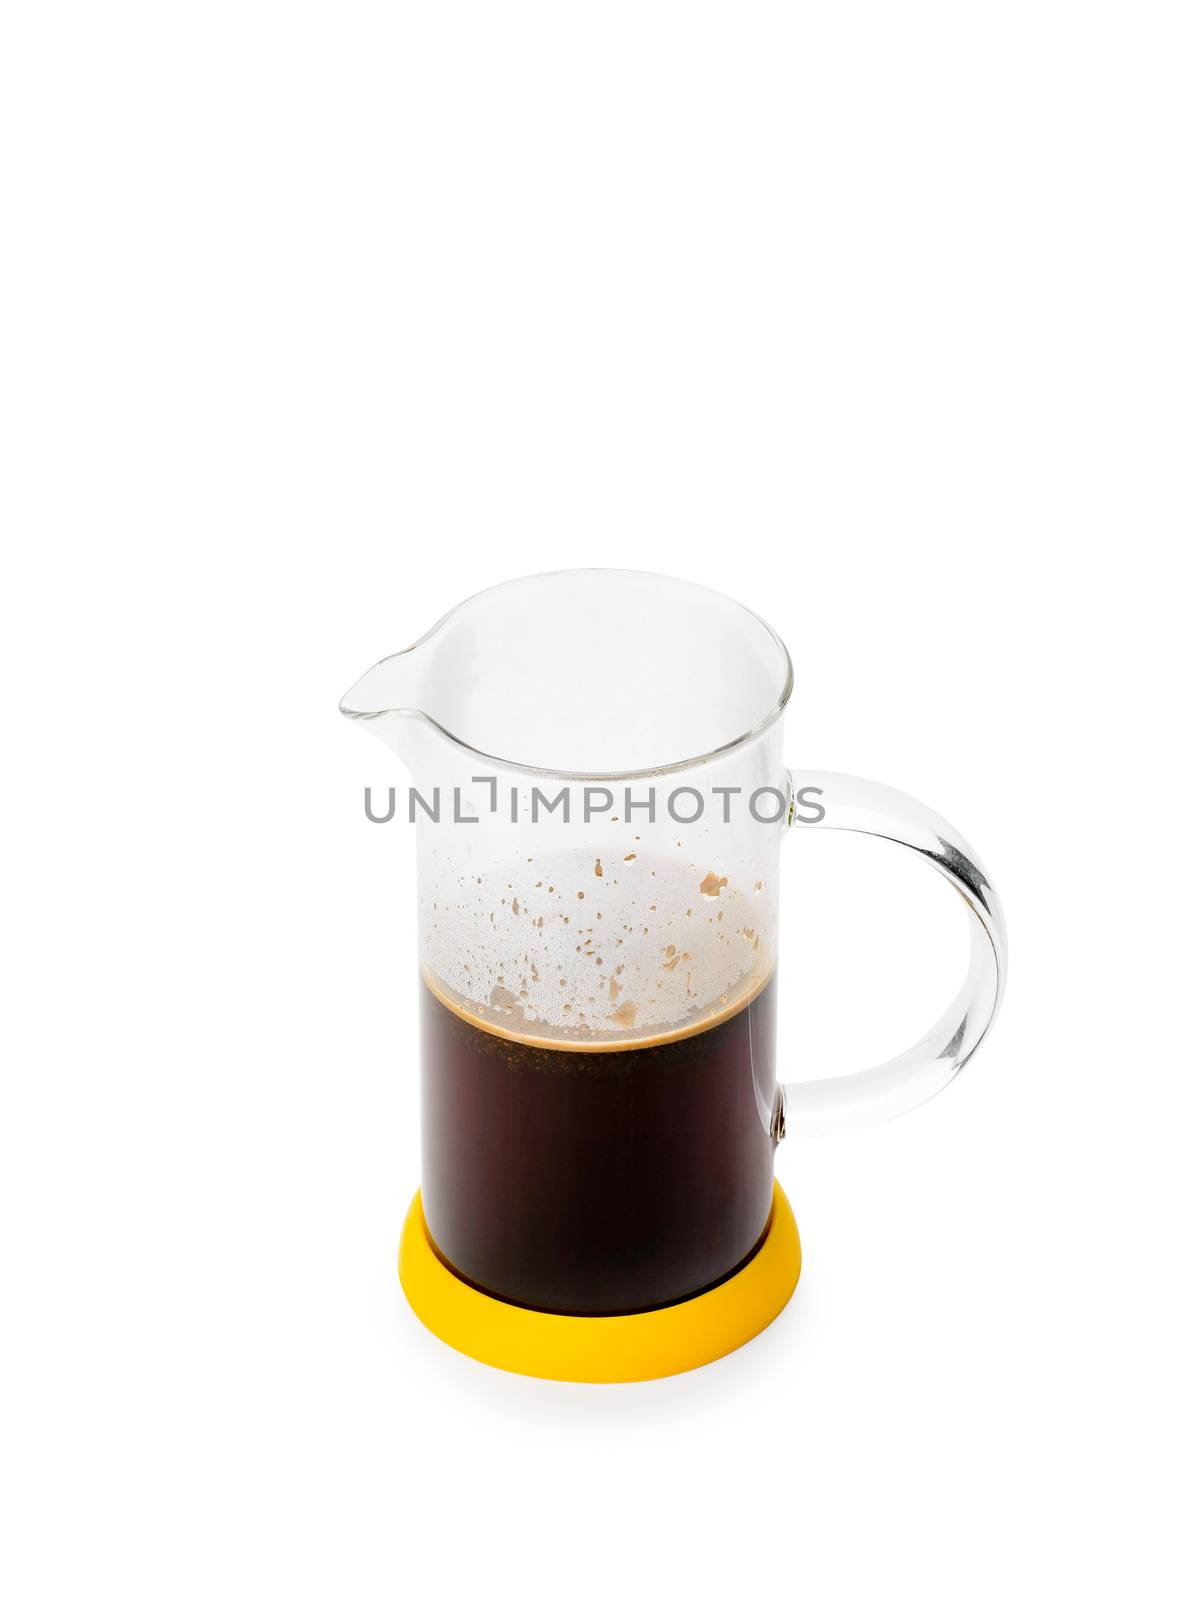 Half full glass French press, without lid,  for coffee and tea, isolated on white background